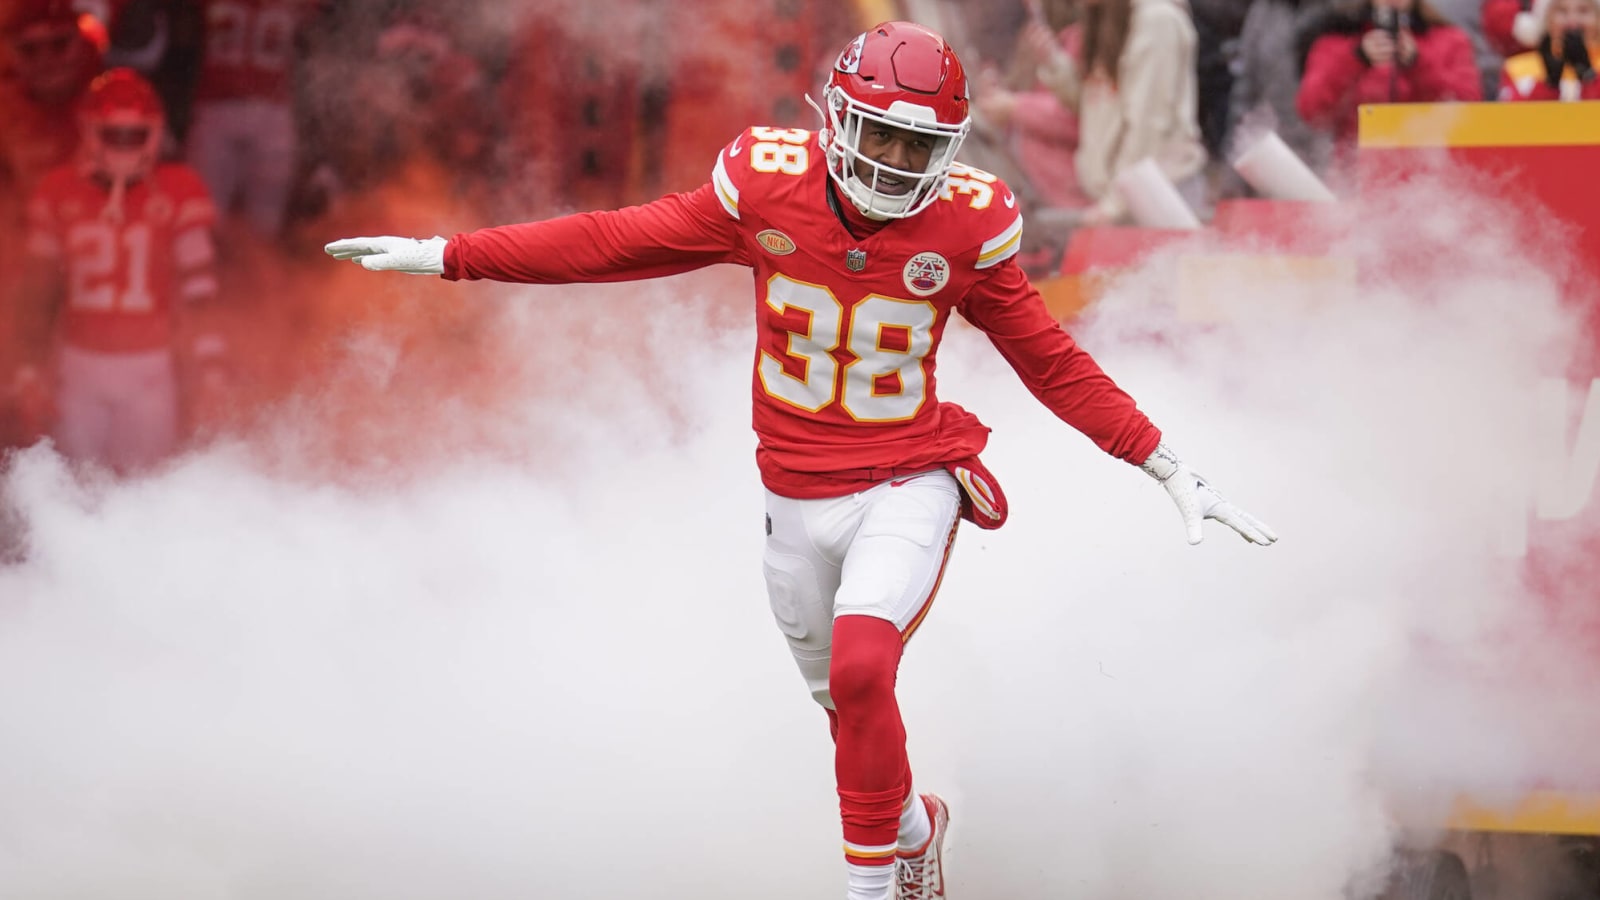 Pair of Chiefs defensive stars appear to be on different paths